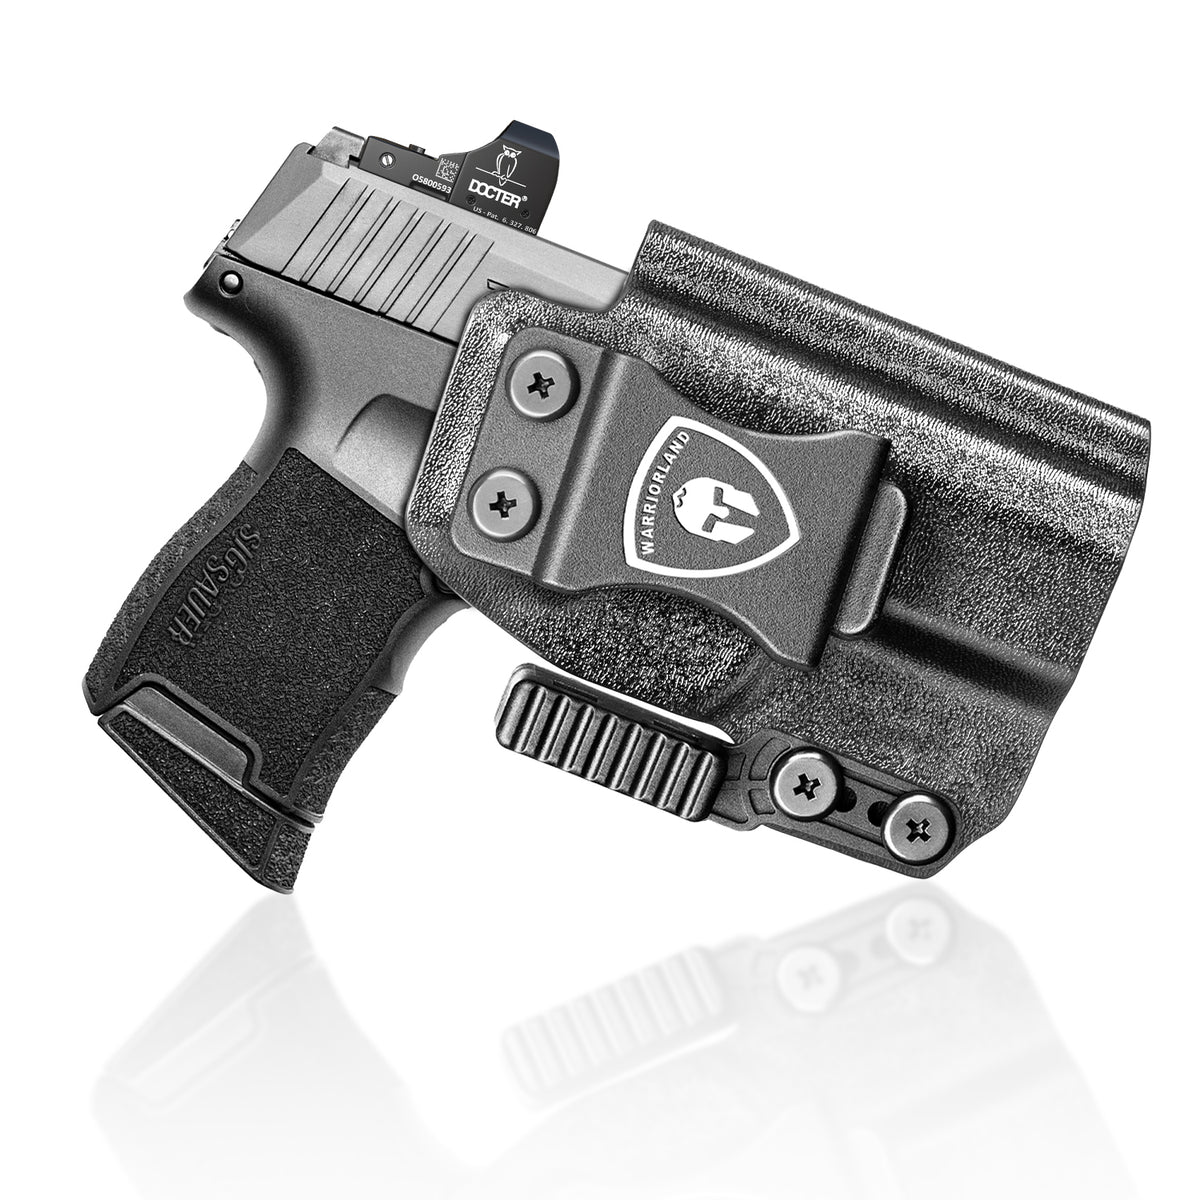 Sig P365 IWB Kydex Holster with Claw Attachment and Optic Cut: Sig Sauer P365 / P365X / P365 SAS, Inside Waistband Appendix Carry P365 Holster, Adj. Cant & Retention, Right Hand|WARRIORLAND